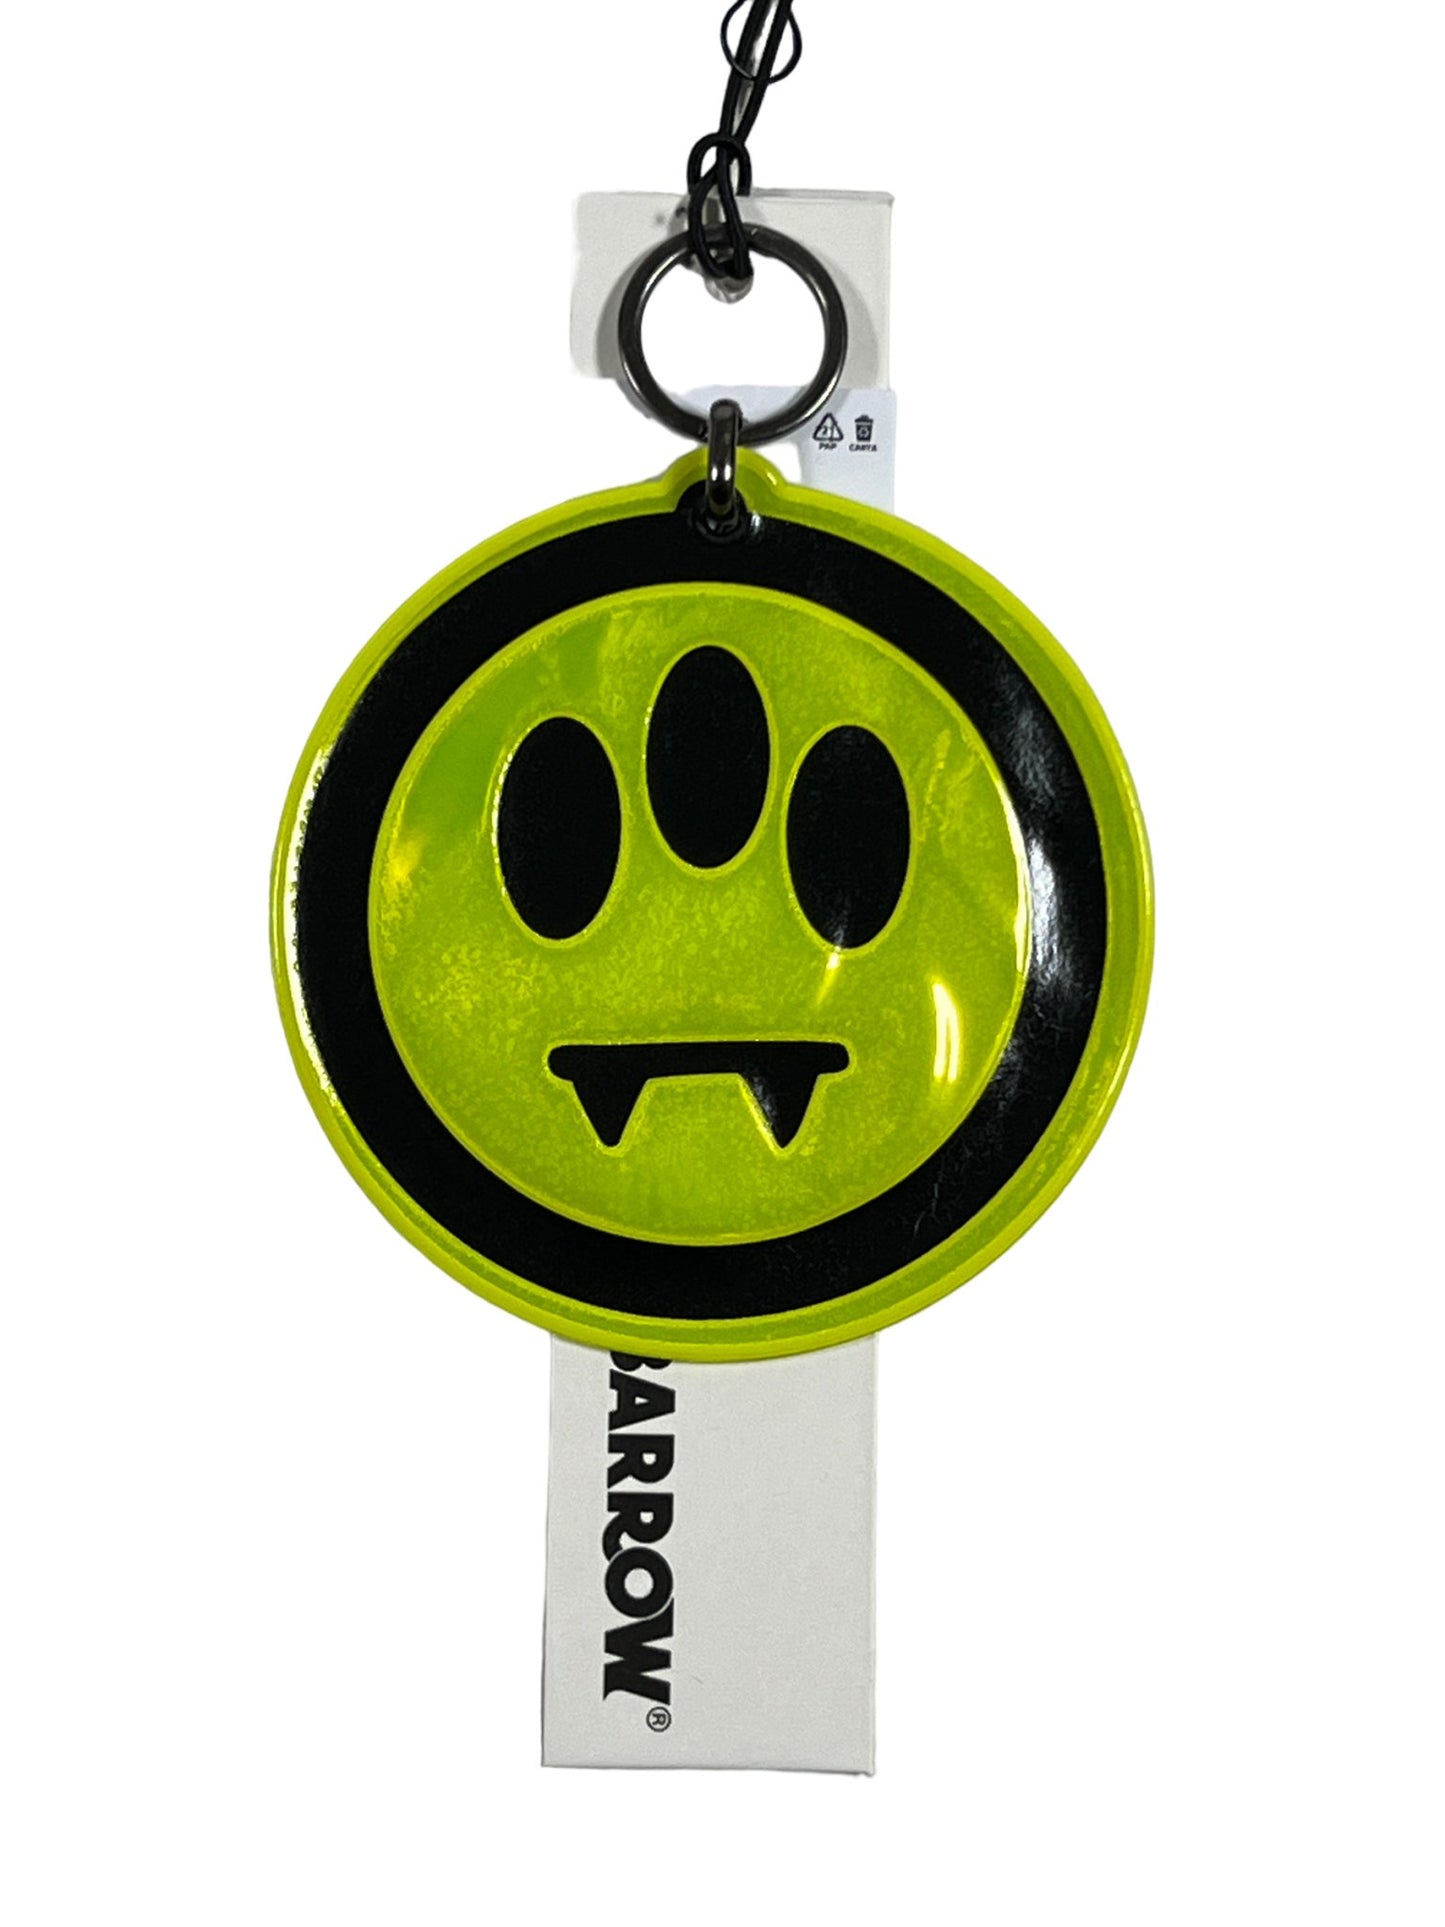 A BARROW neon green keychain with a black paw print design and a dripping paint effect, accompanied by a brand tag.